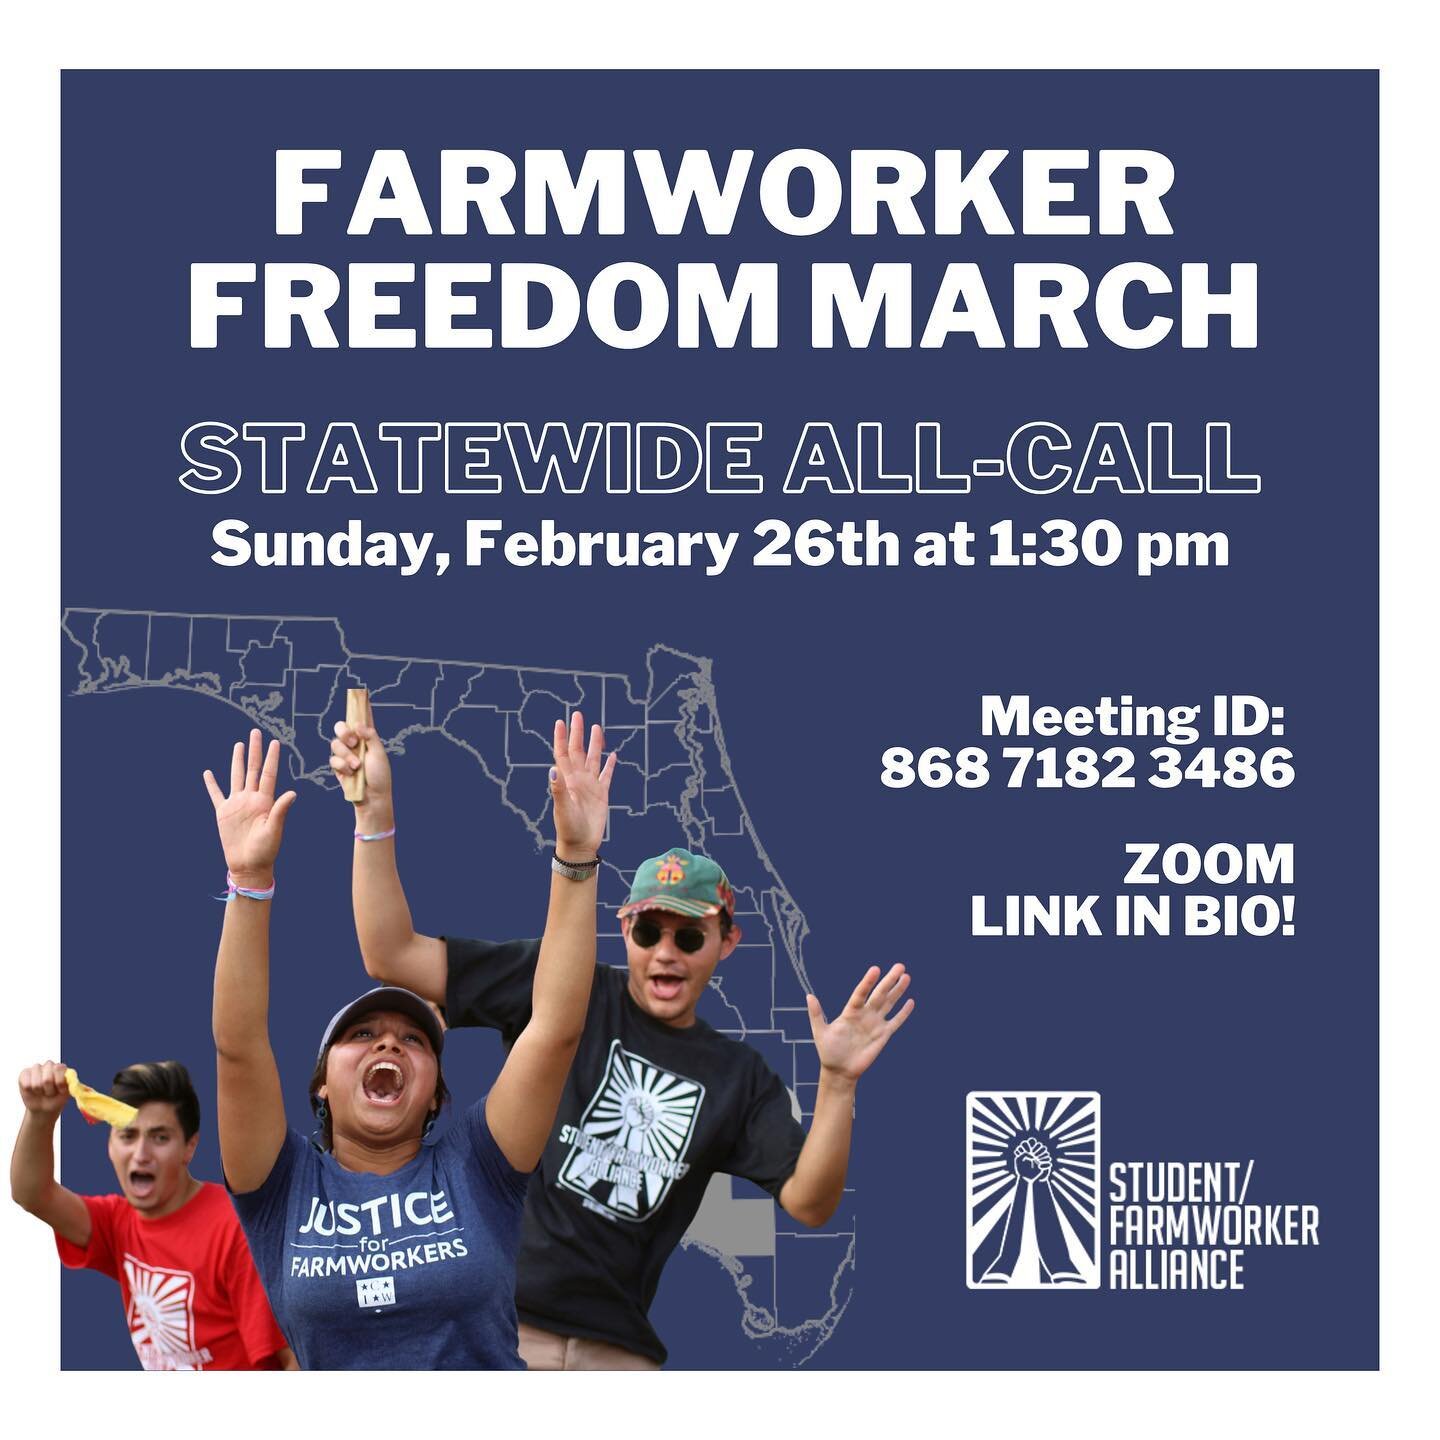 SFA is very excited to announce our first Statewide All-Call happening this Sunday, February 26th at 1:30 PM. This event is perfect for long term SFA allies, and new students interested in human rights, food justice, or labor organizing. Excited to s